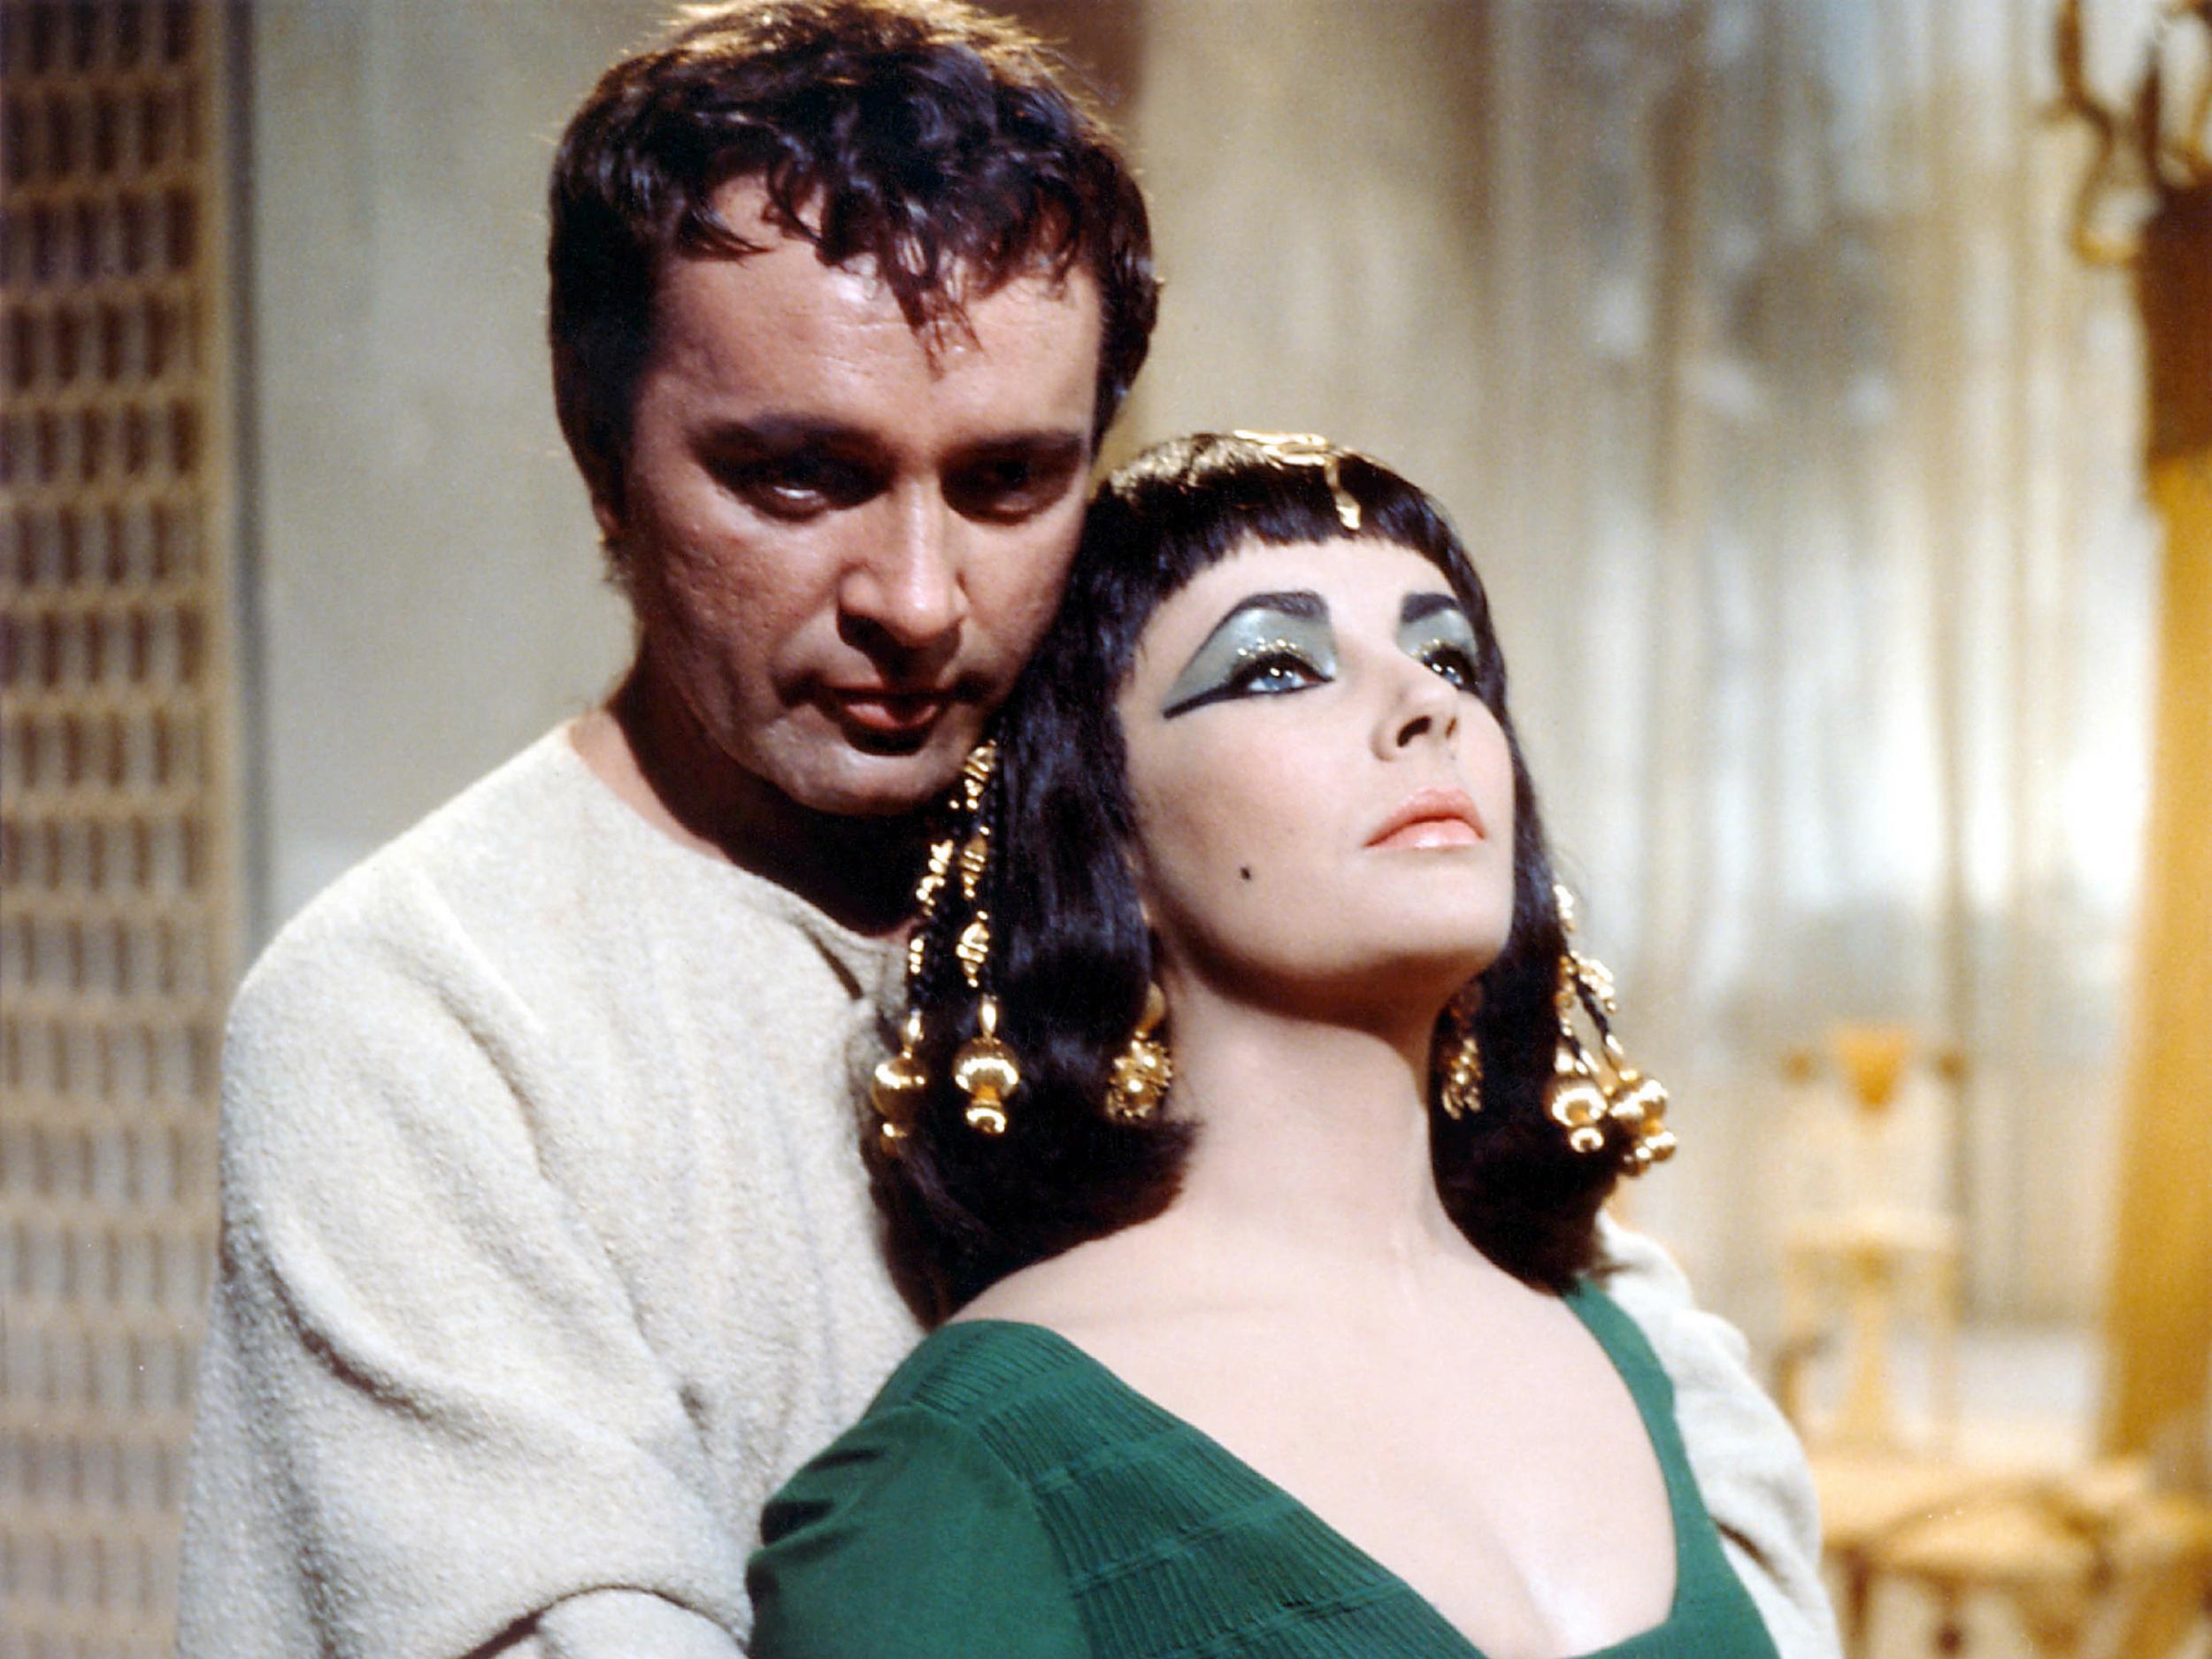 In Liz Taylor’s 1963 iteration, ‘a genuinely powerful woman has been transmuted into a shamelessly seductive one’